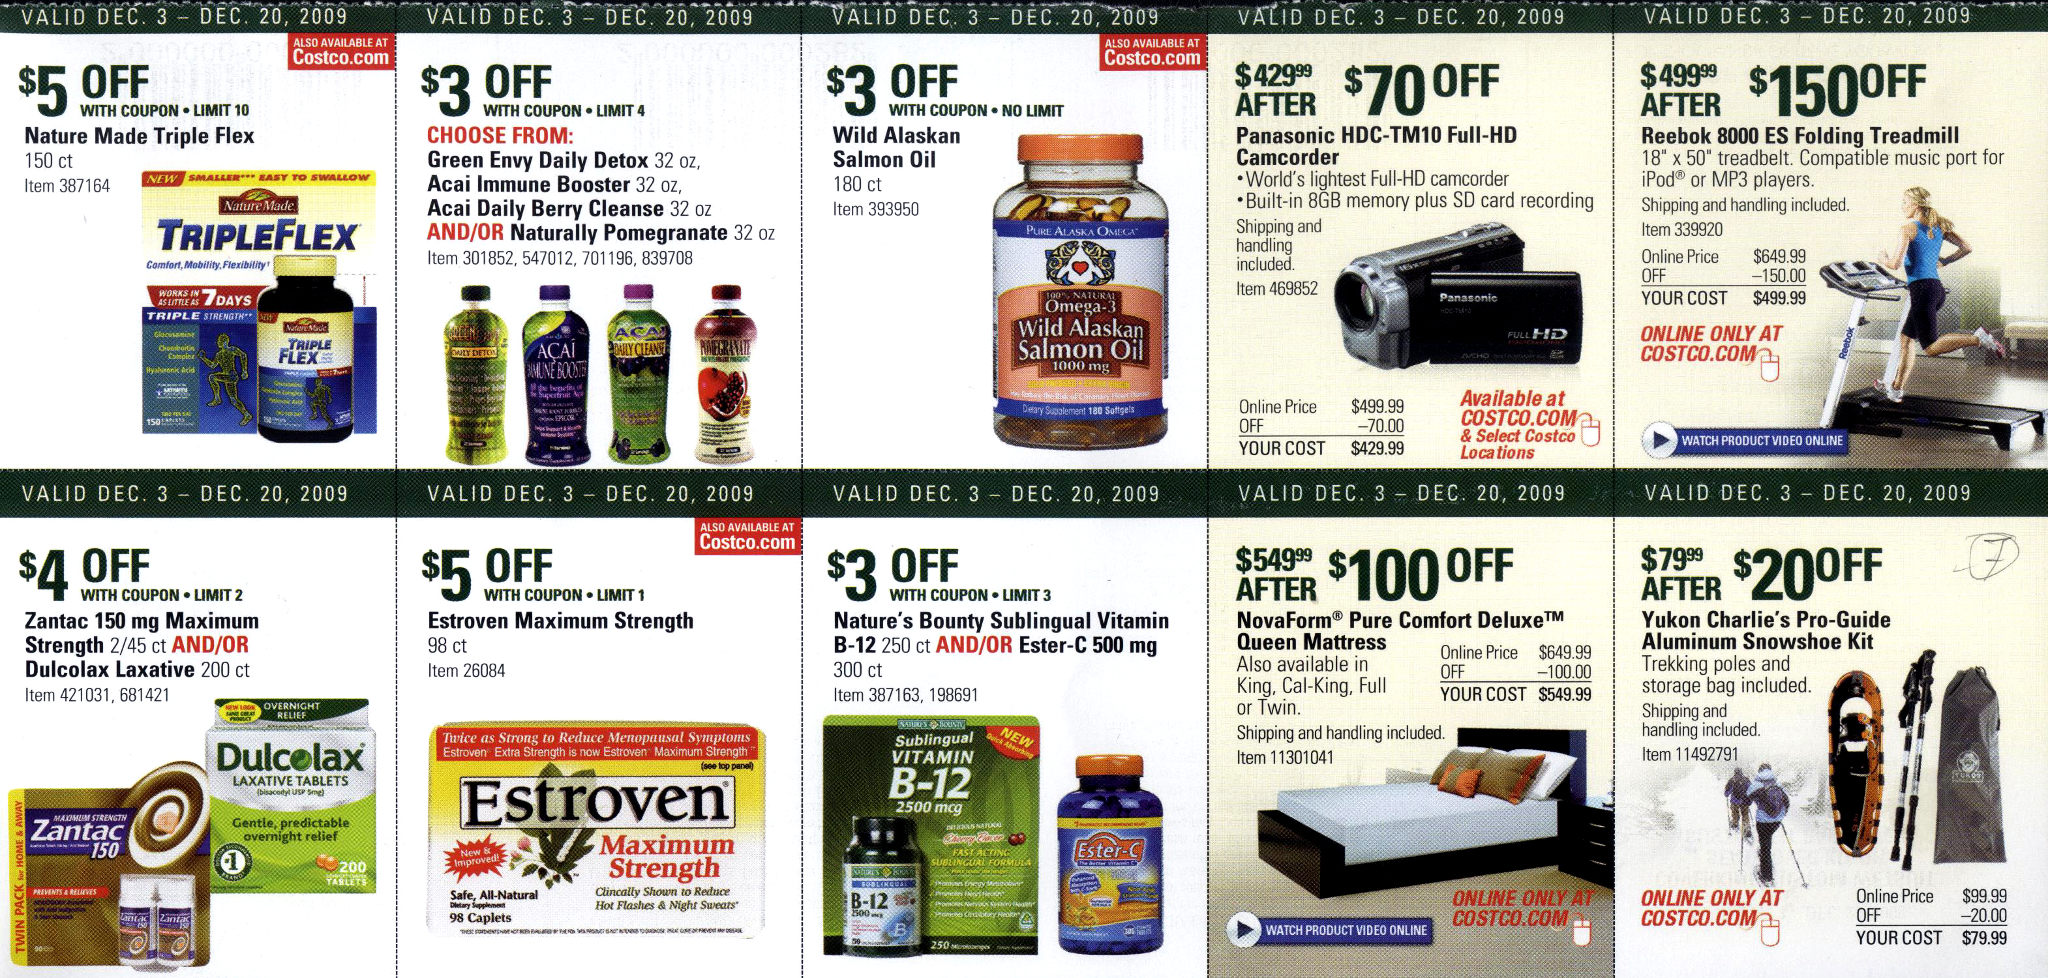 Coupon book page 7 in full-size.